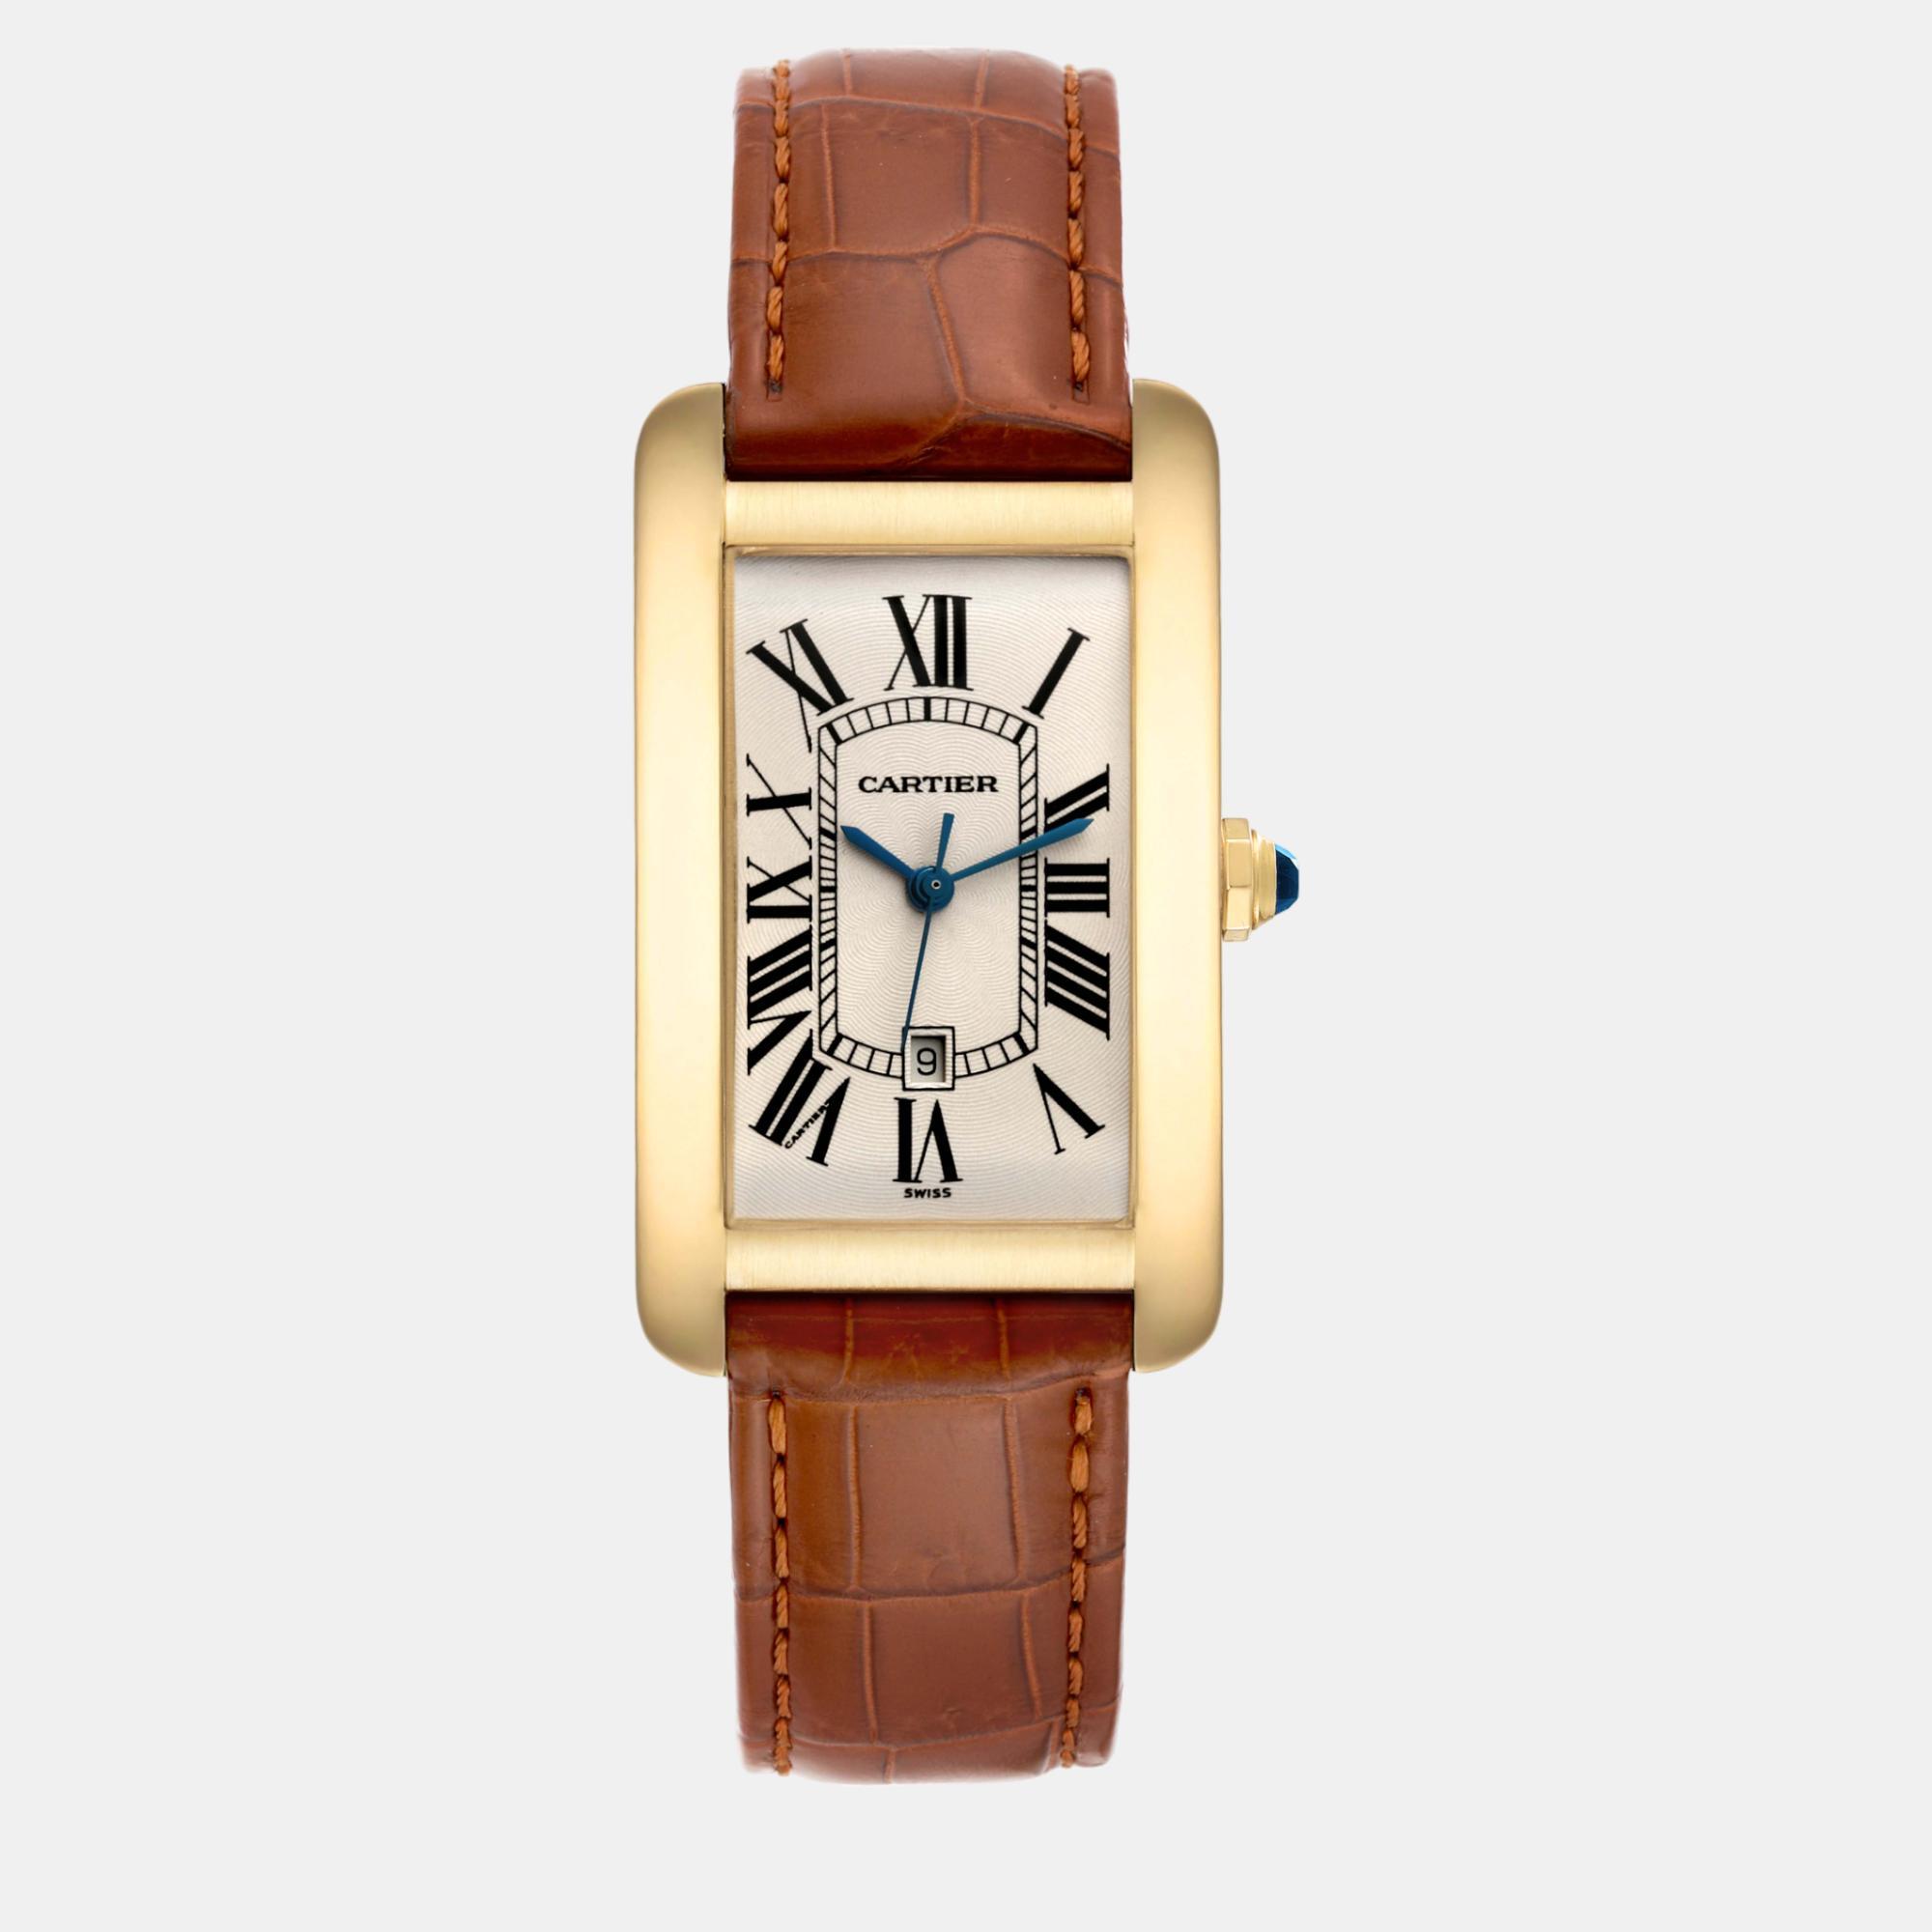 Cartier tank americaine yellow gold automatic men's watch 26.6 mm